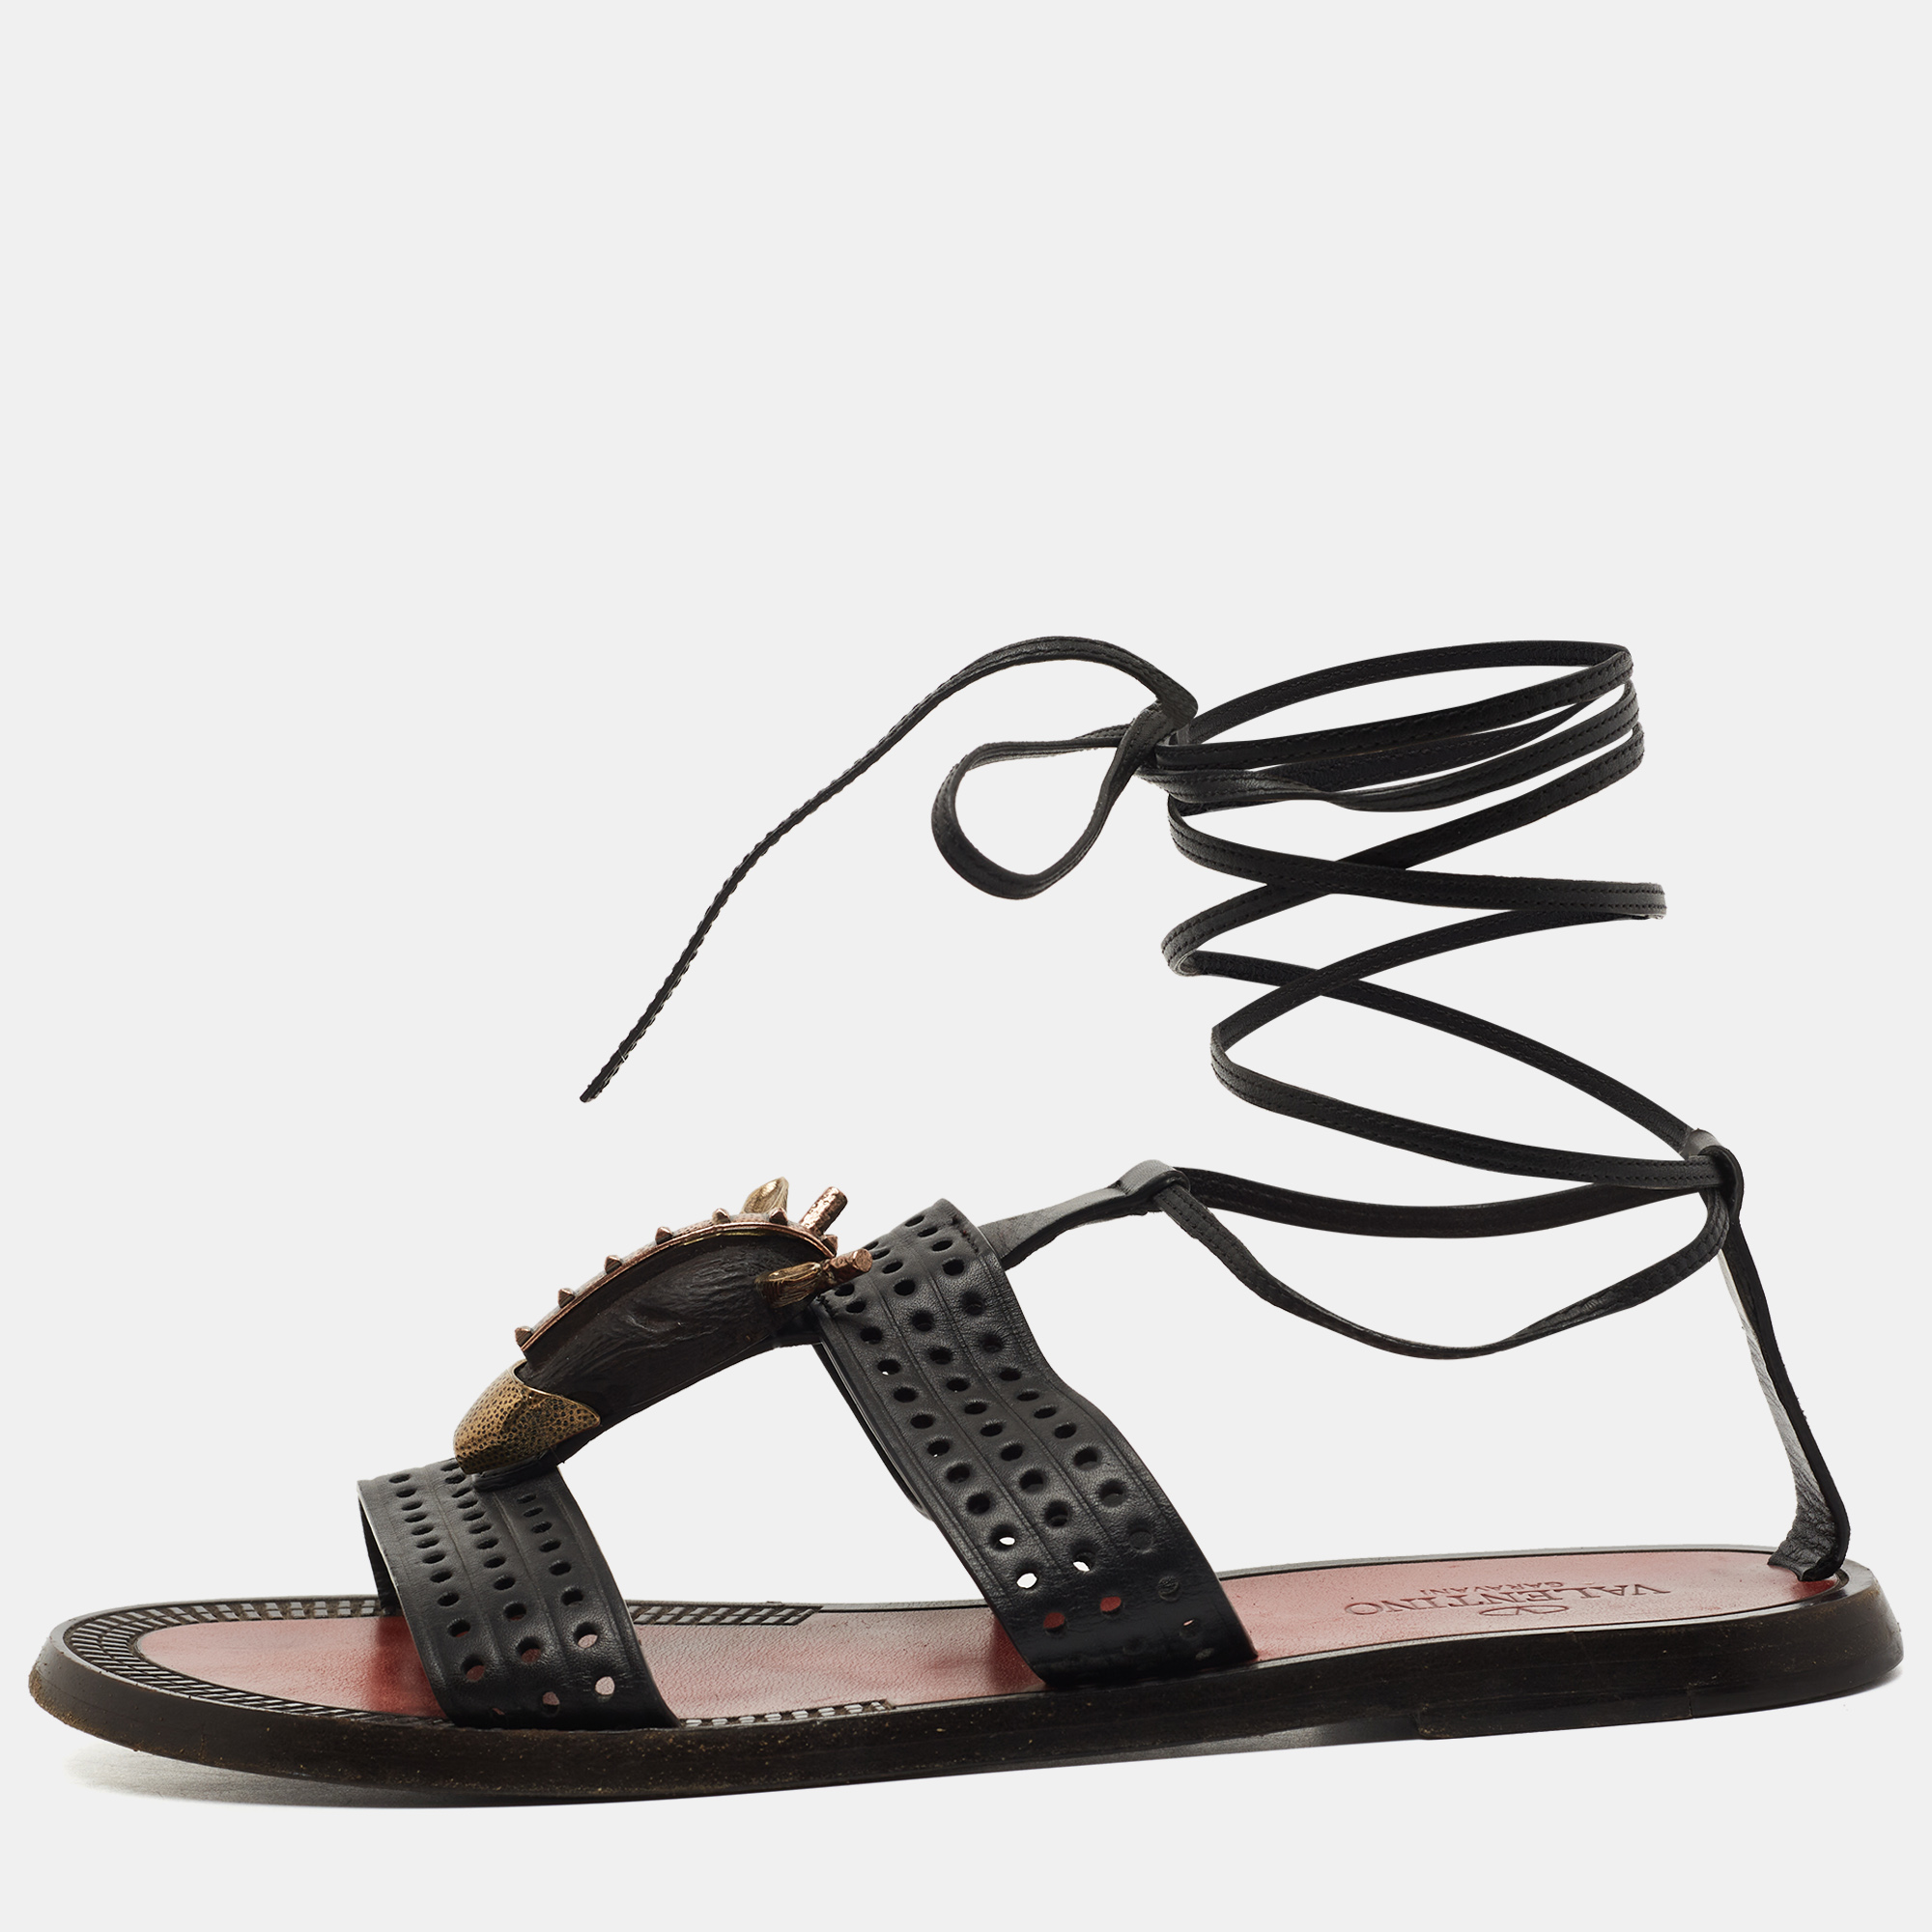 These sandals will frame your feet in an elegant manner. Crafted from quality materials they display a classy display comfortable insoles and durable heels.